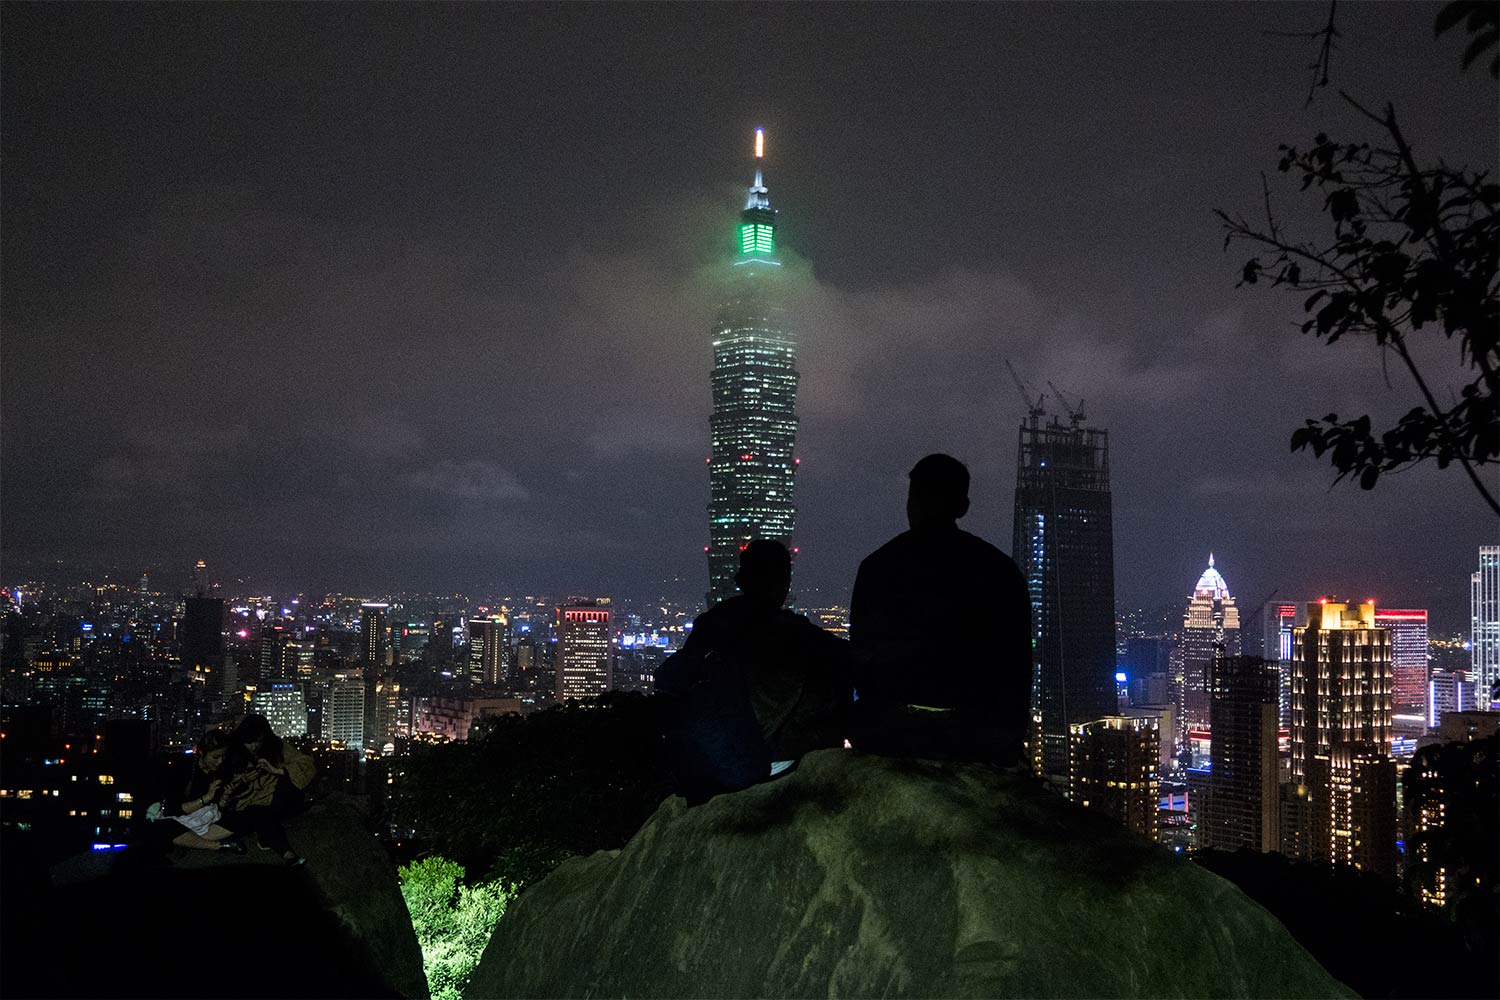 Things to do in Taipei: Hang out in the best view of Taipei 101 - the Elephant Mountain Trail